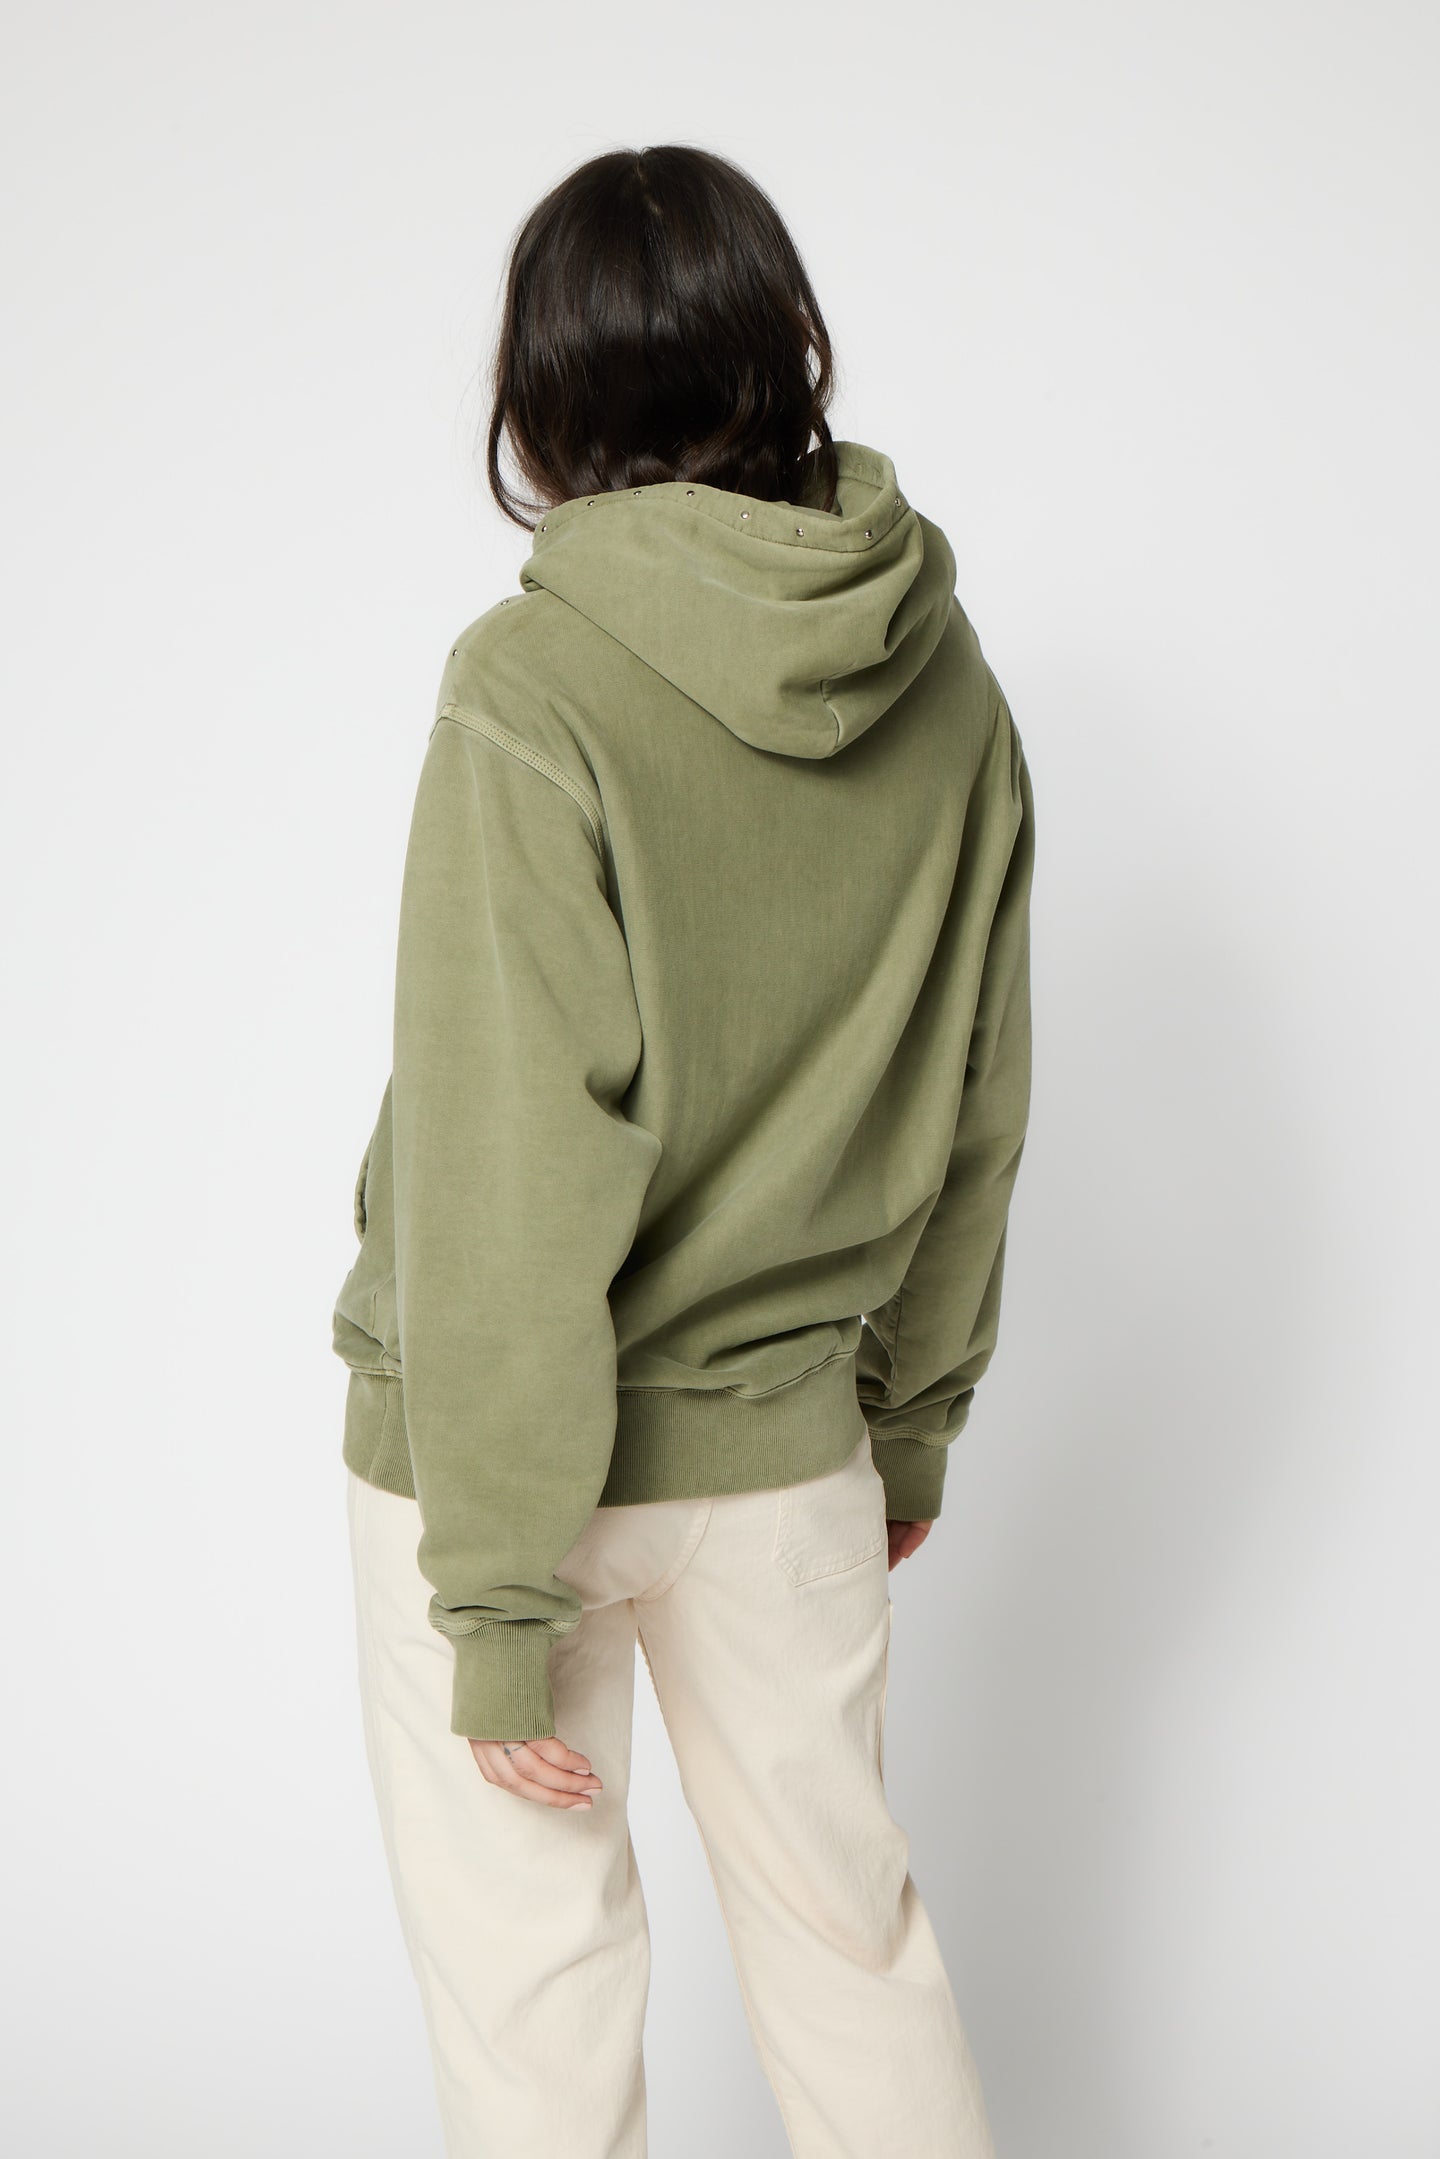 SRPLS STUDDED & REPAIRED HOODIE / PIGMENT SAGE